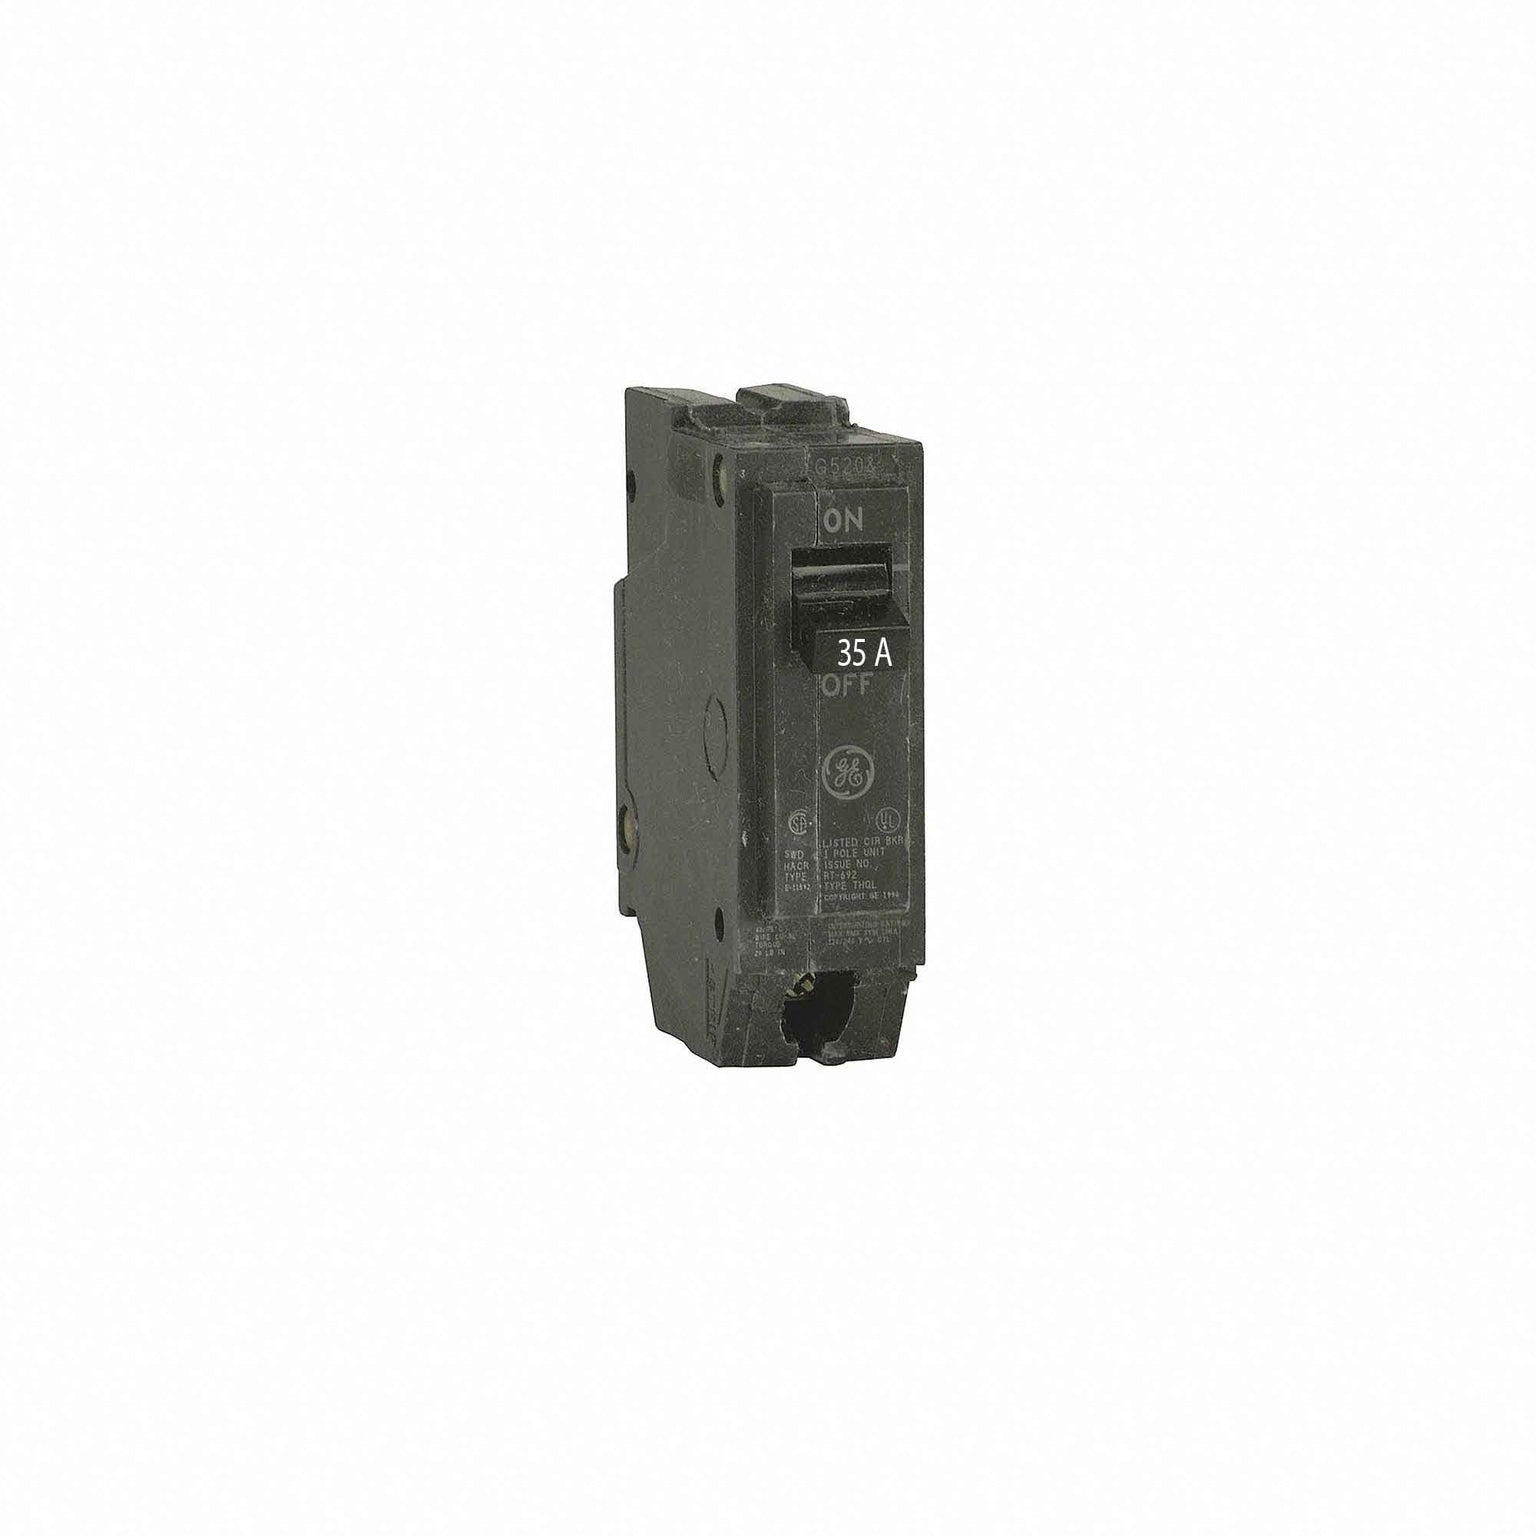 THQC1135WL - General Electrics - Molded Case Circuit Breakers
